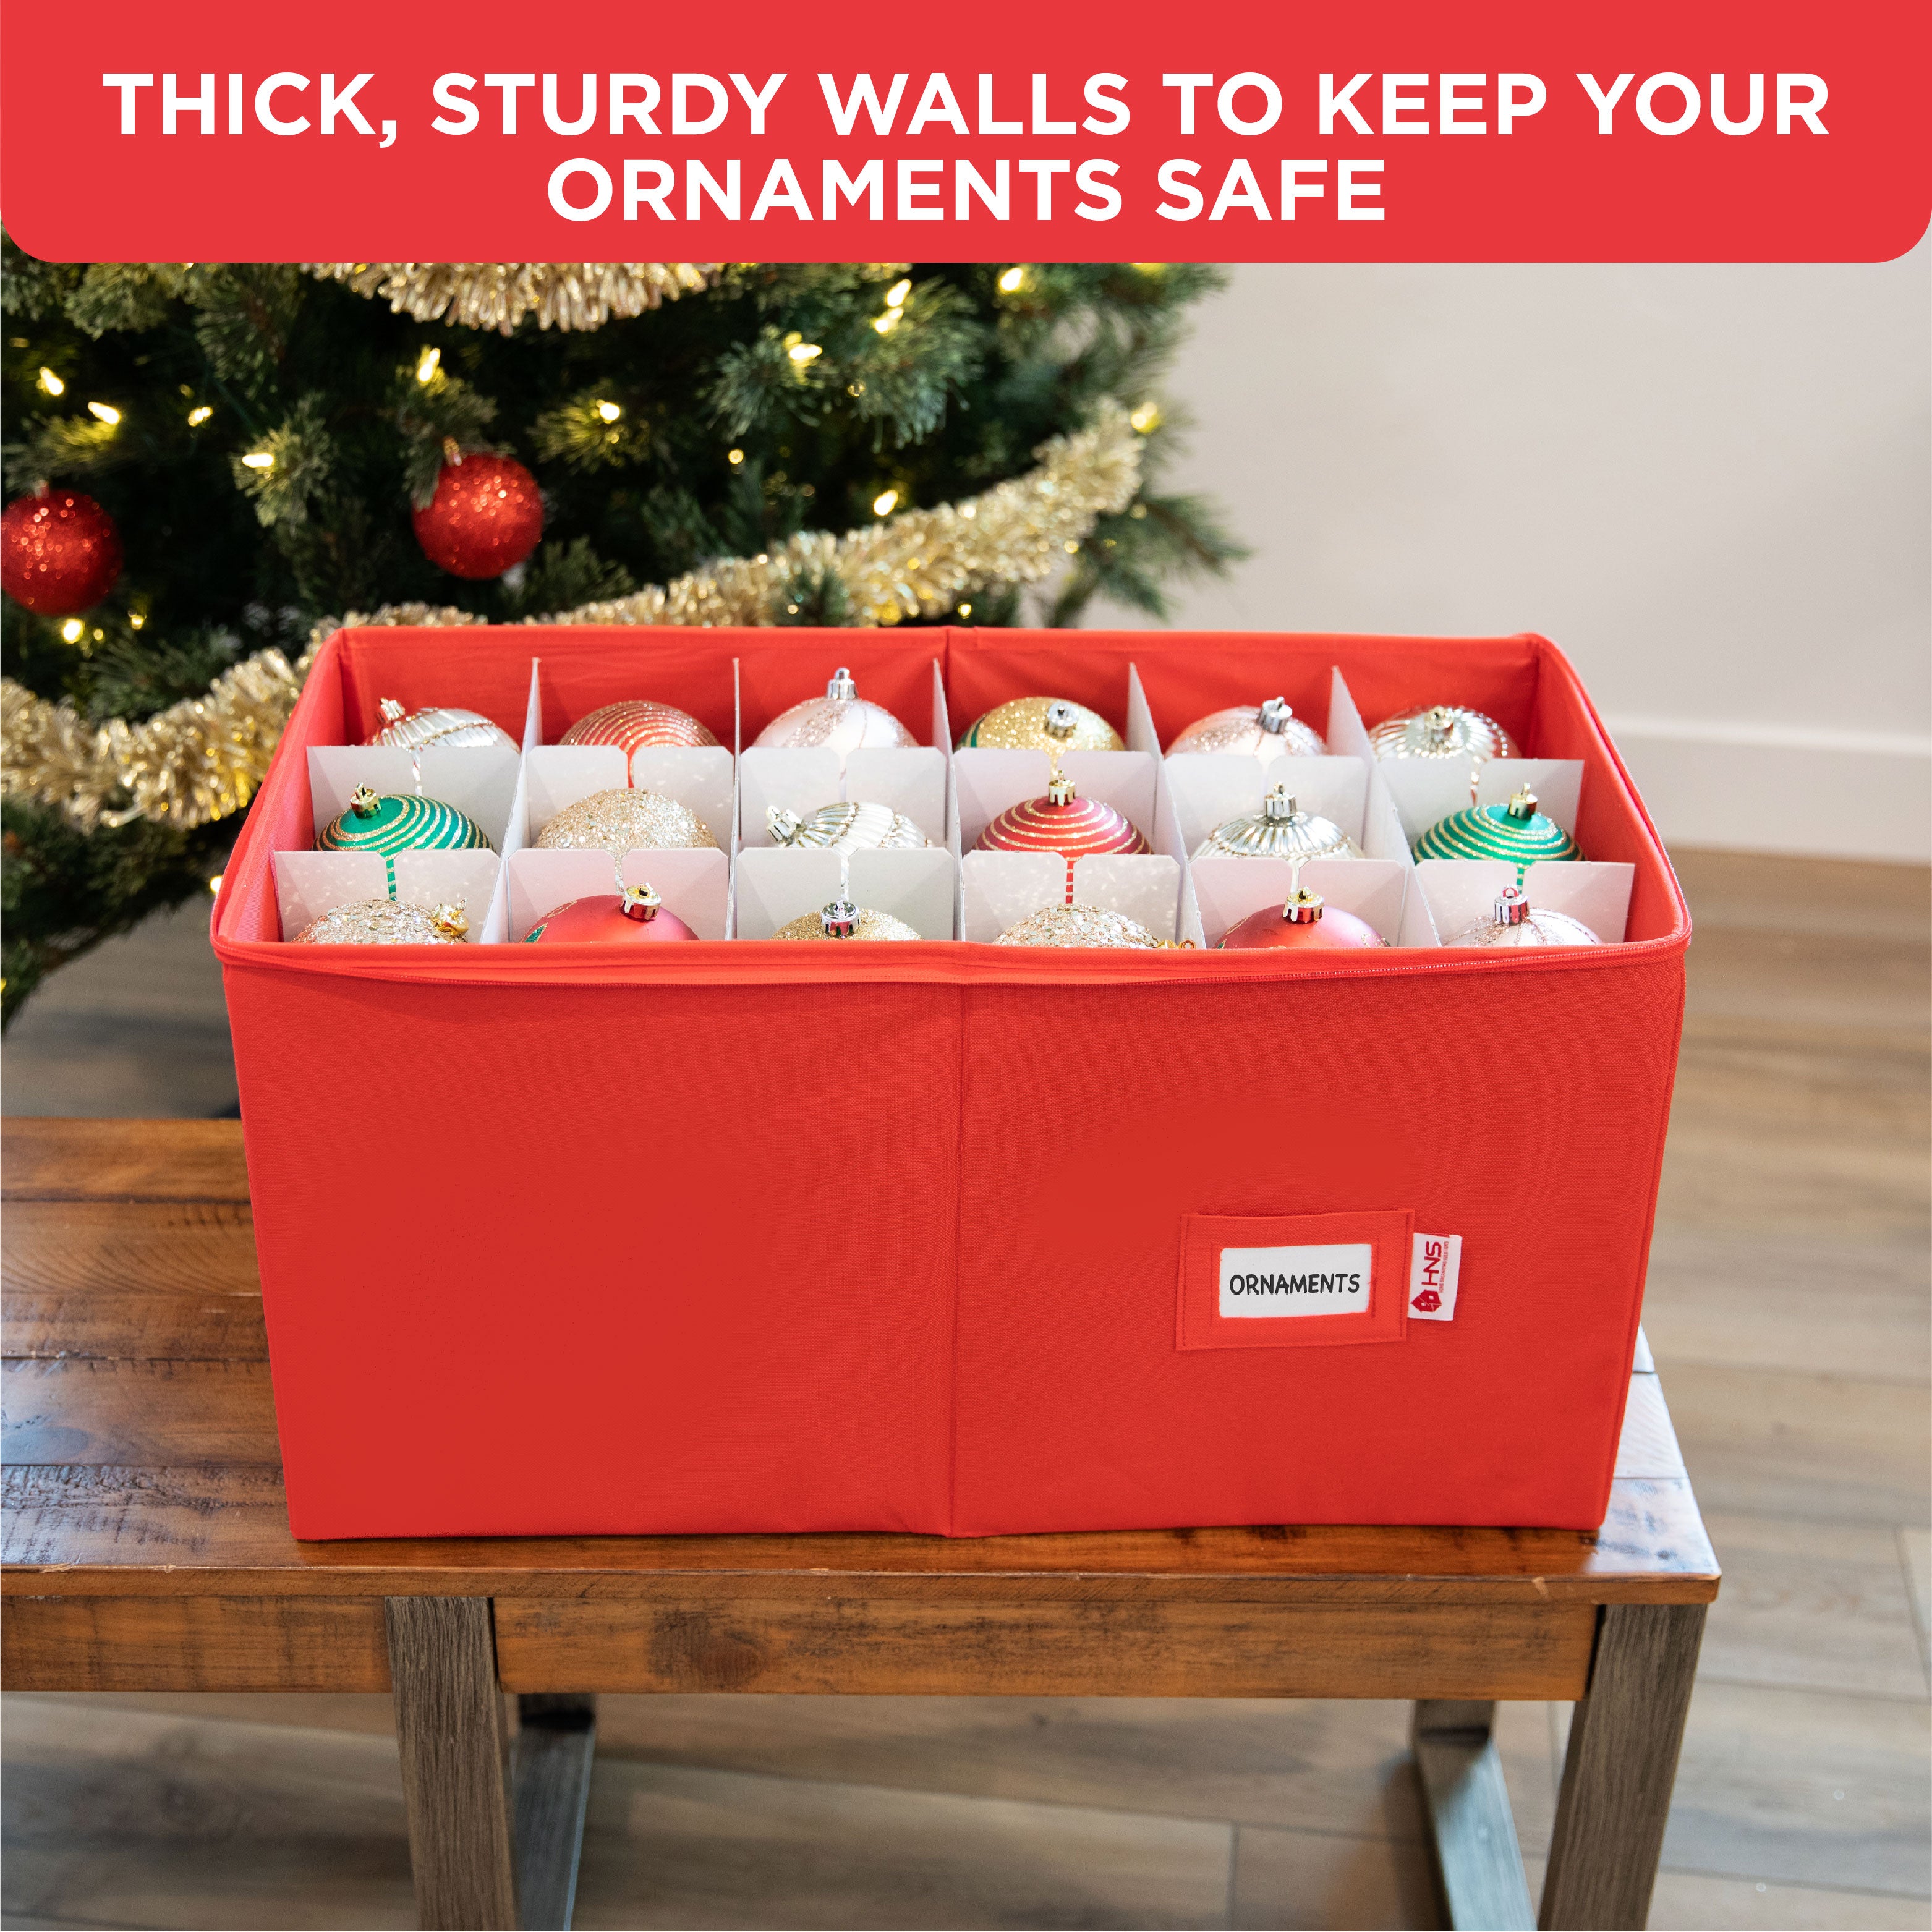 Christmas Ornament Storage Container with Dividers -Box Stores Up to 54 - 4" Ornaments, Convenient, Adjustable, Zippered, Heavy Duty 600D, Large Bin